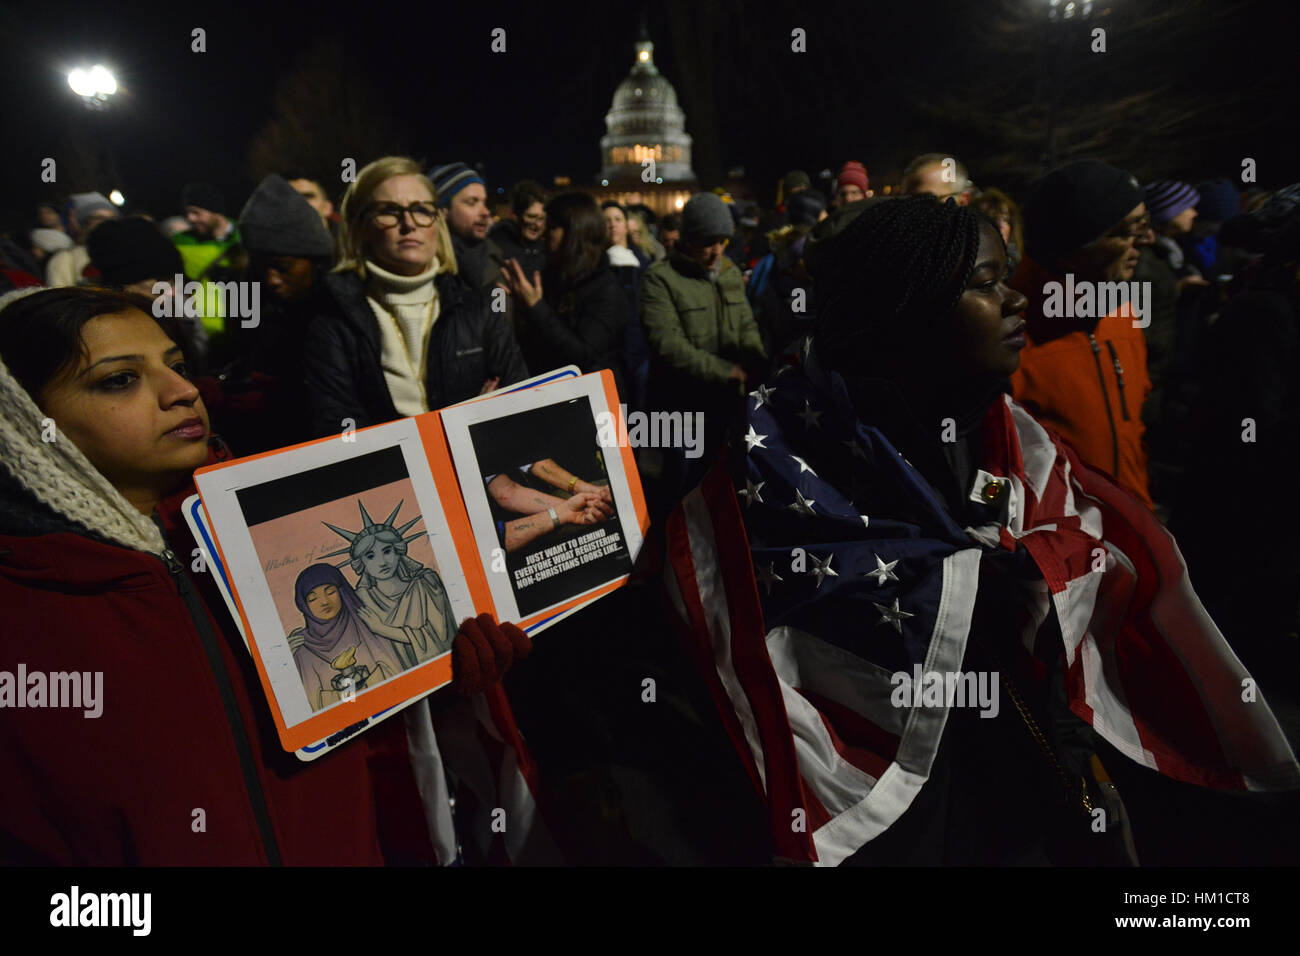 Washington, USA. 30th Jan, 2017. Hundreds gather in front of the U.S. Supreme Court in Washington D.C. to protest President Trump's travel ban targeting refugees and citizens of seven majority Muslim nations. Congressional Democrats attended the demonstration, a continuation of protests accross the nation that began after Trump signed the executive order. Credit: Miguel Juarez Lugo/ZUMA Wire/Alamy Live News Stock Photo